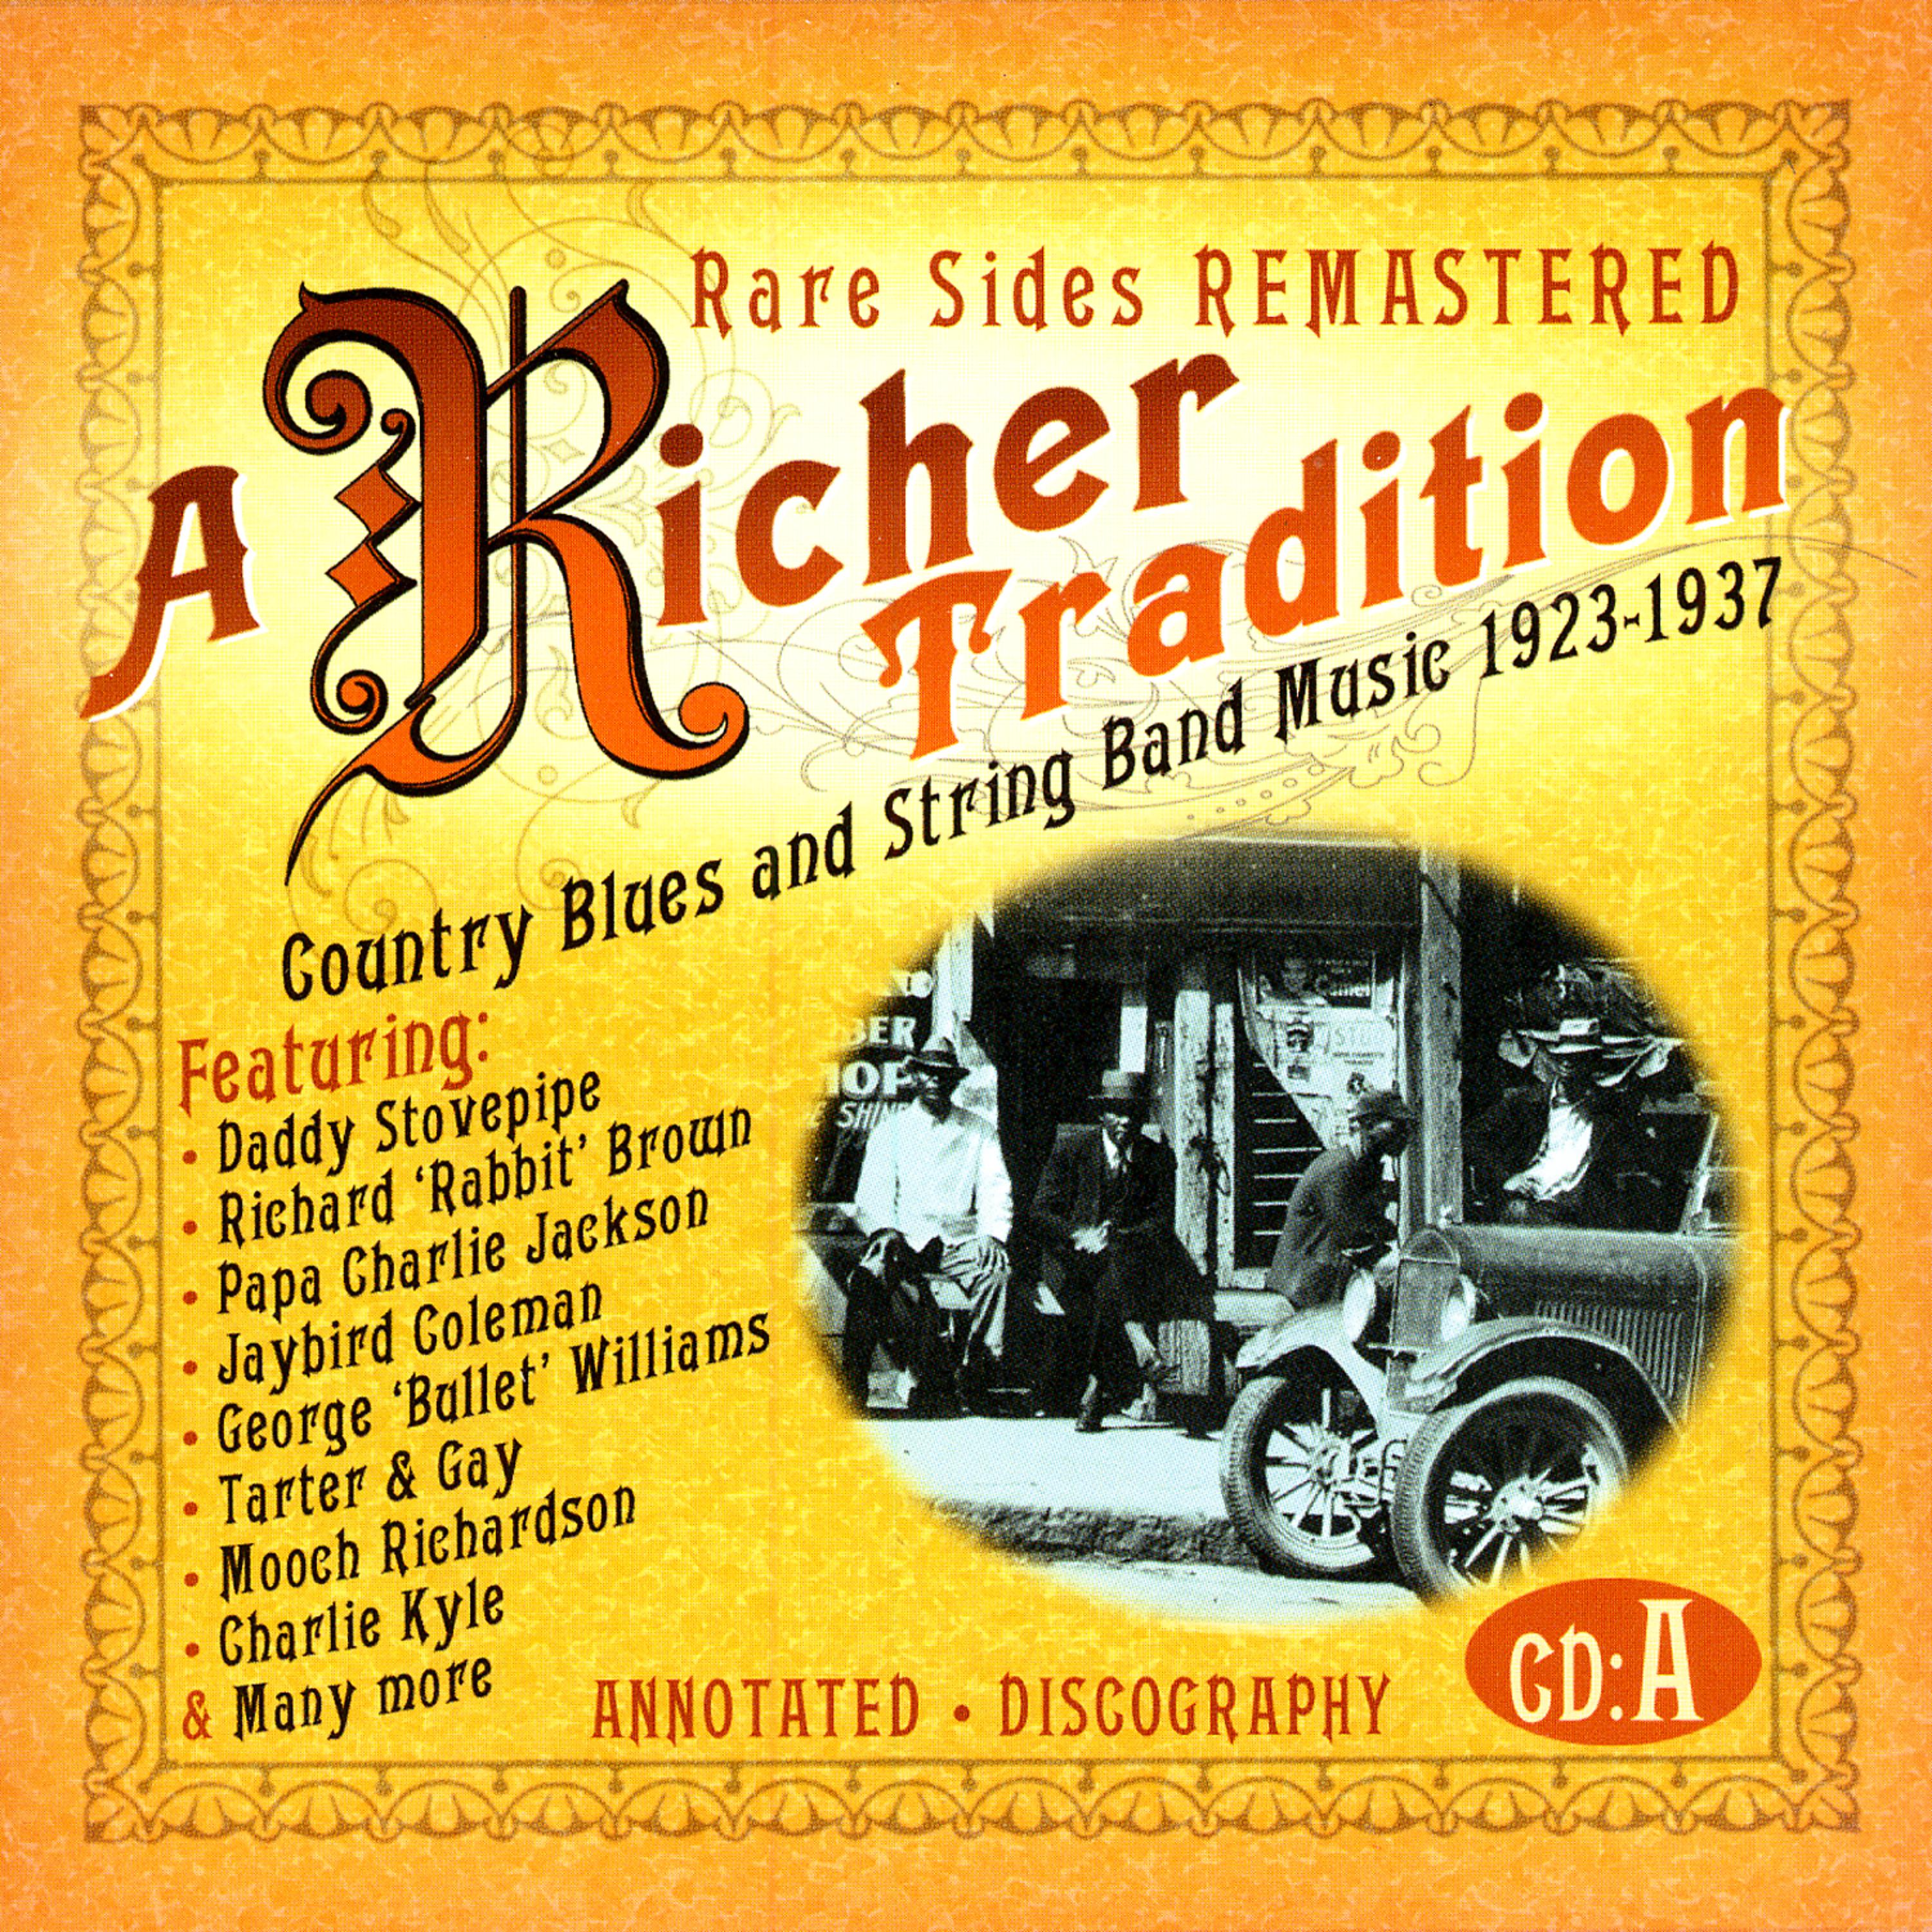 Постер альбома A Richer Tradition - Country Blues & String Band Music, 1923-1937, CD A